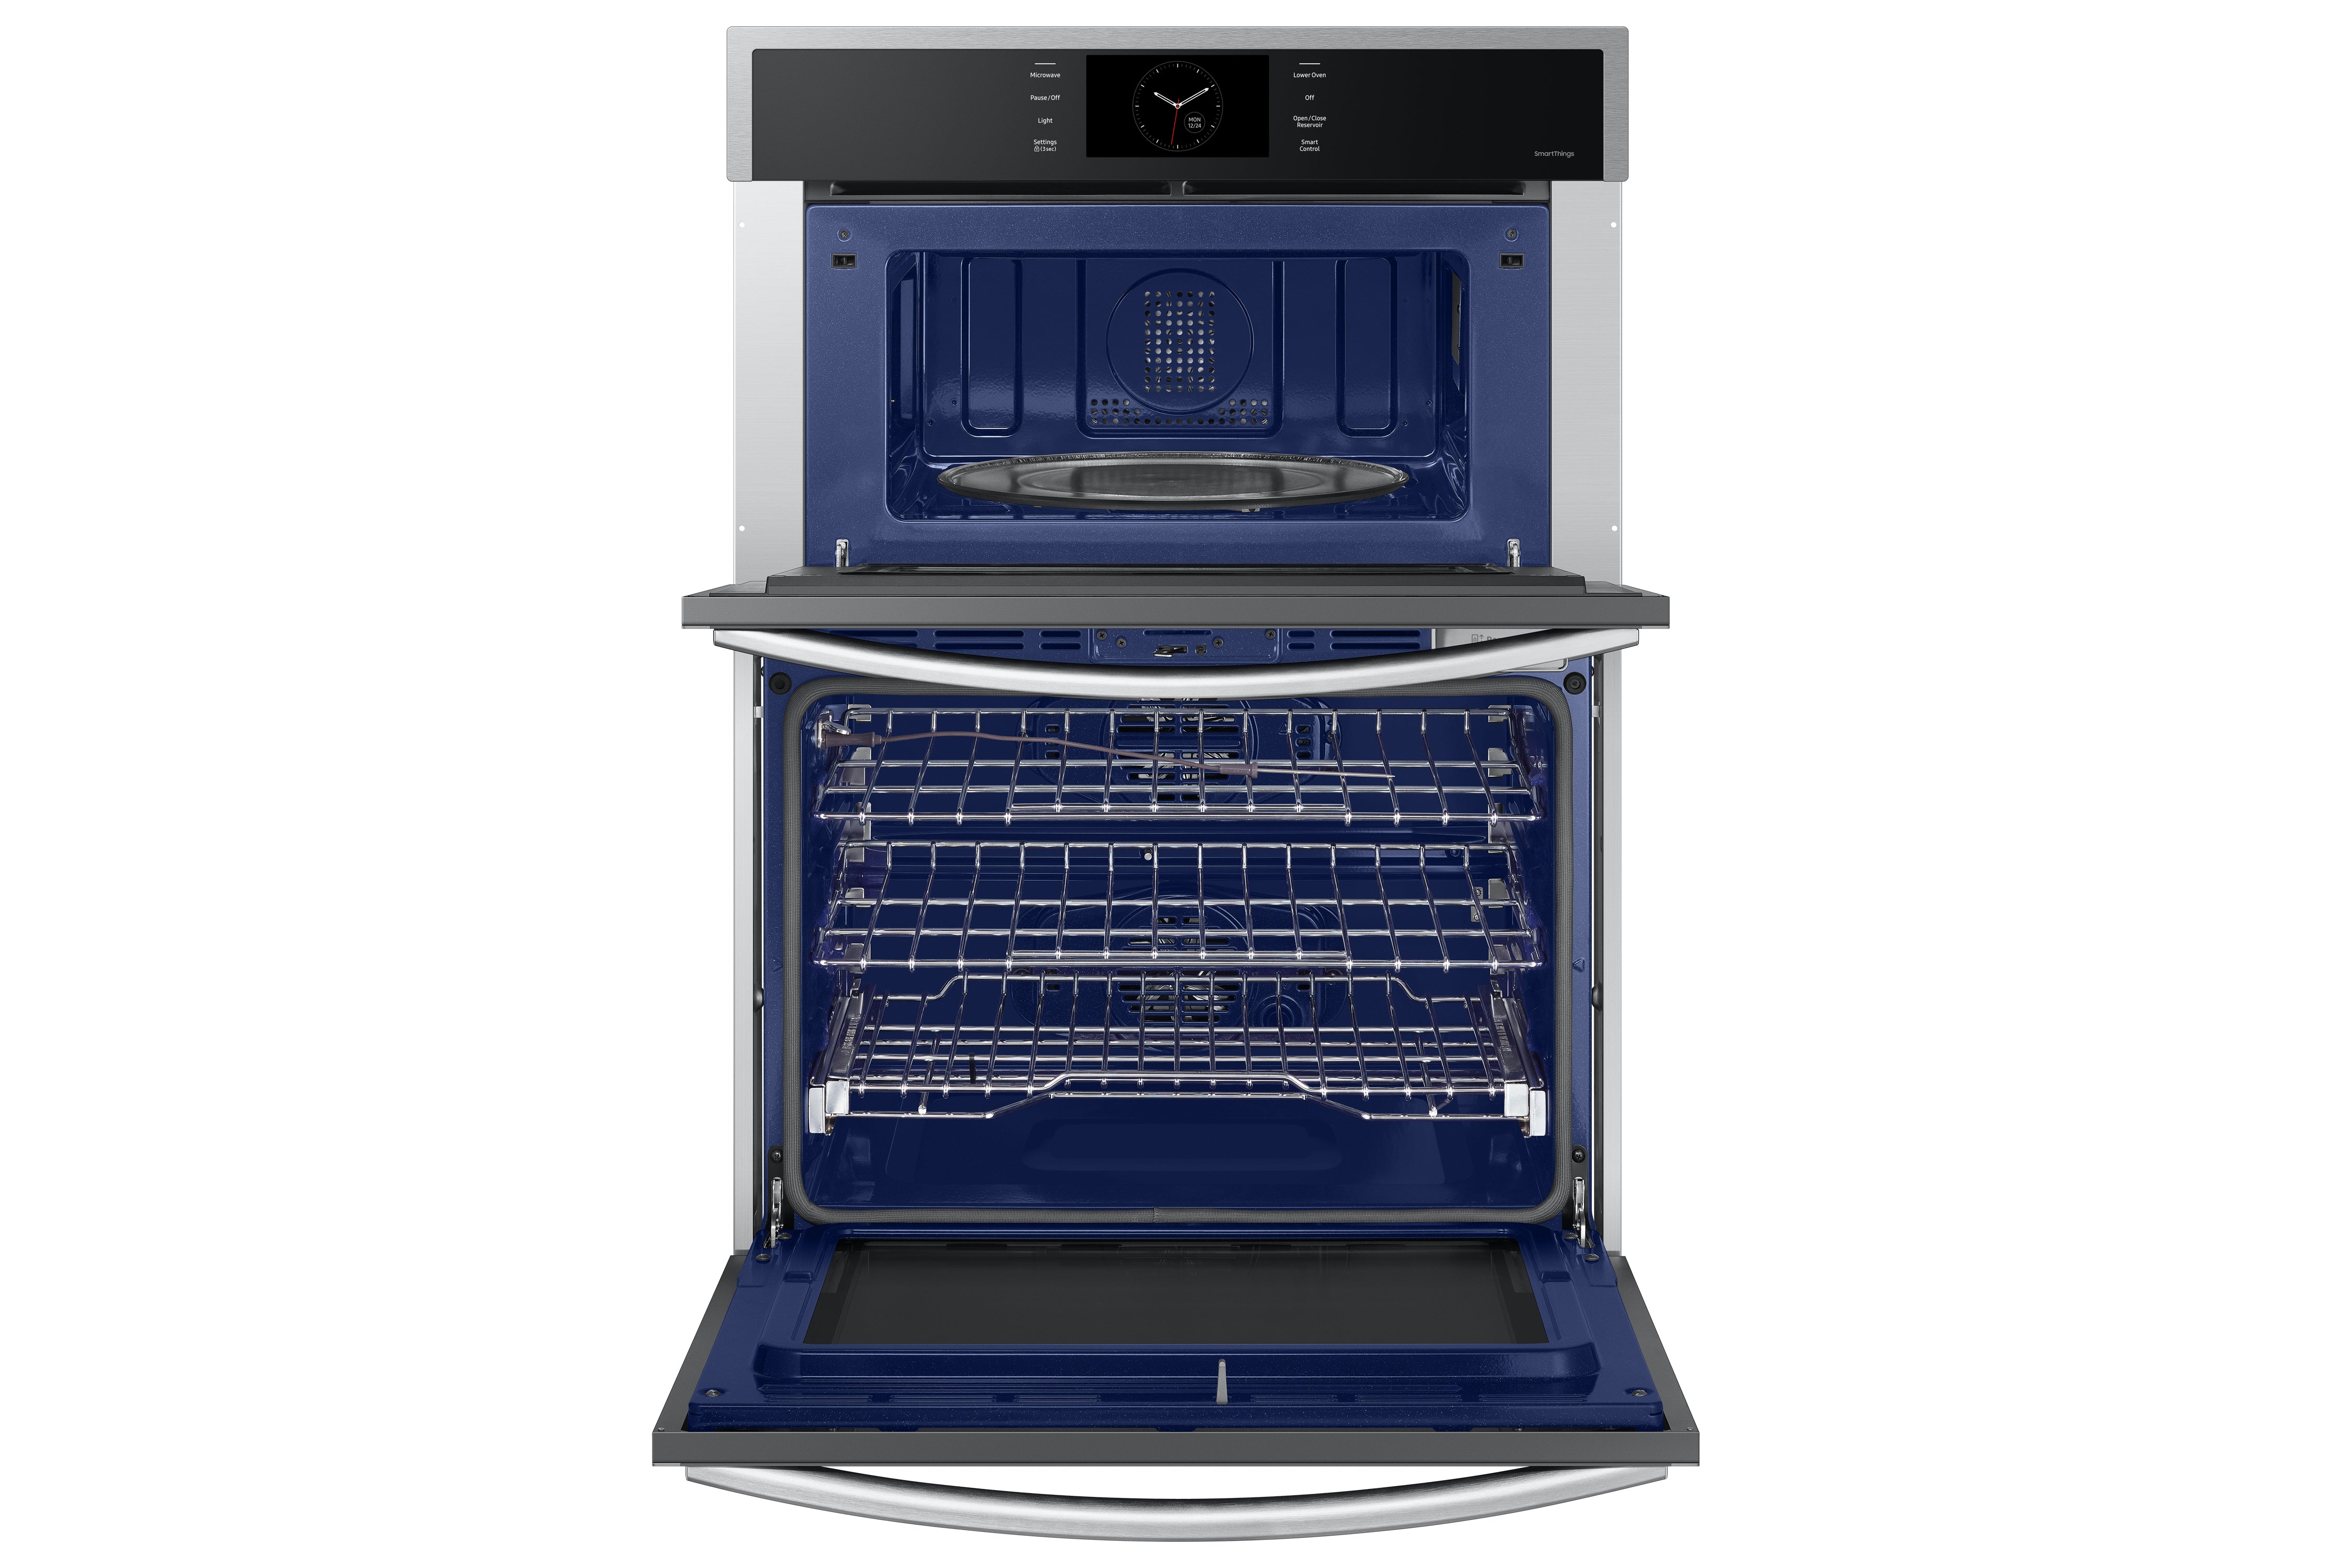 Samsung - 5.1 cu. ft Combination Wall Oven in Stainless - NQ70CG600DSRAA